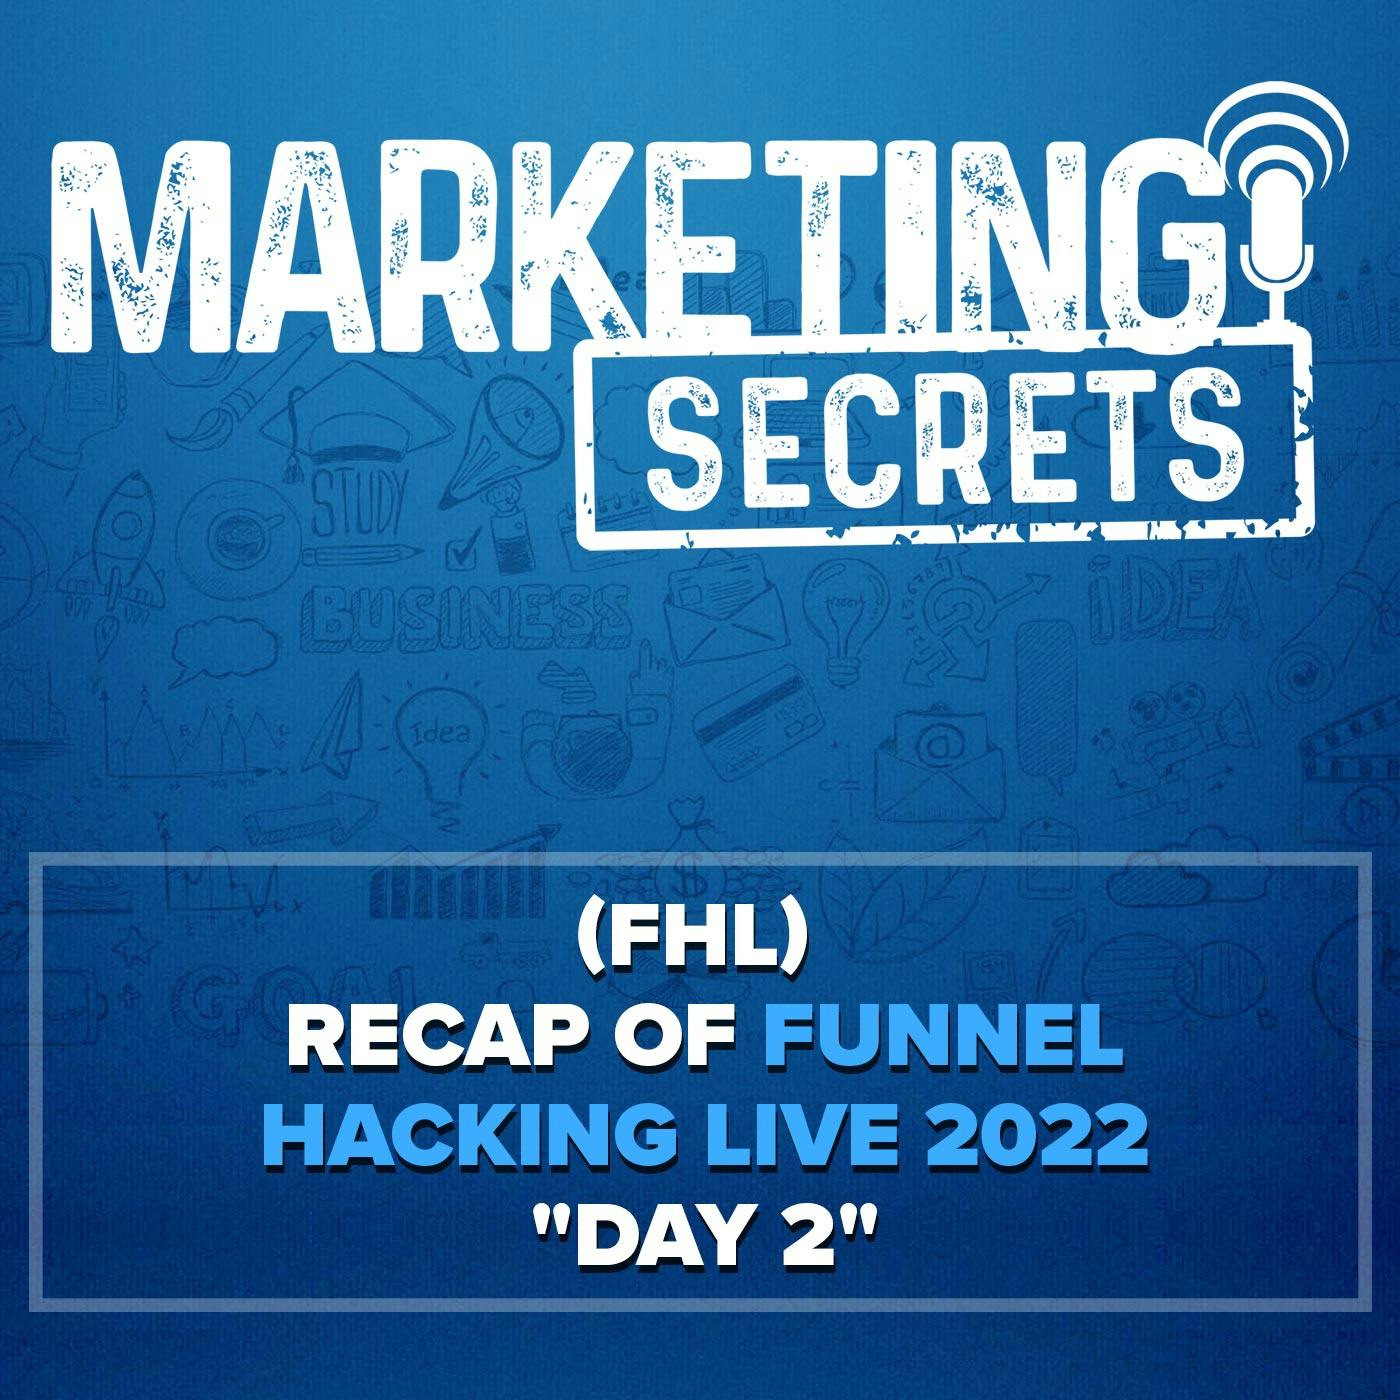 (FHL) Recap of Funnel Hacking Live 2022 ”Day 2”